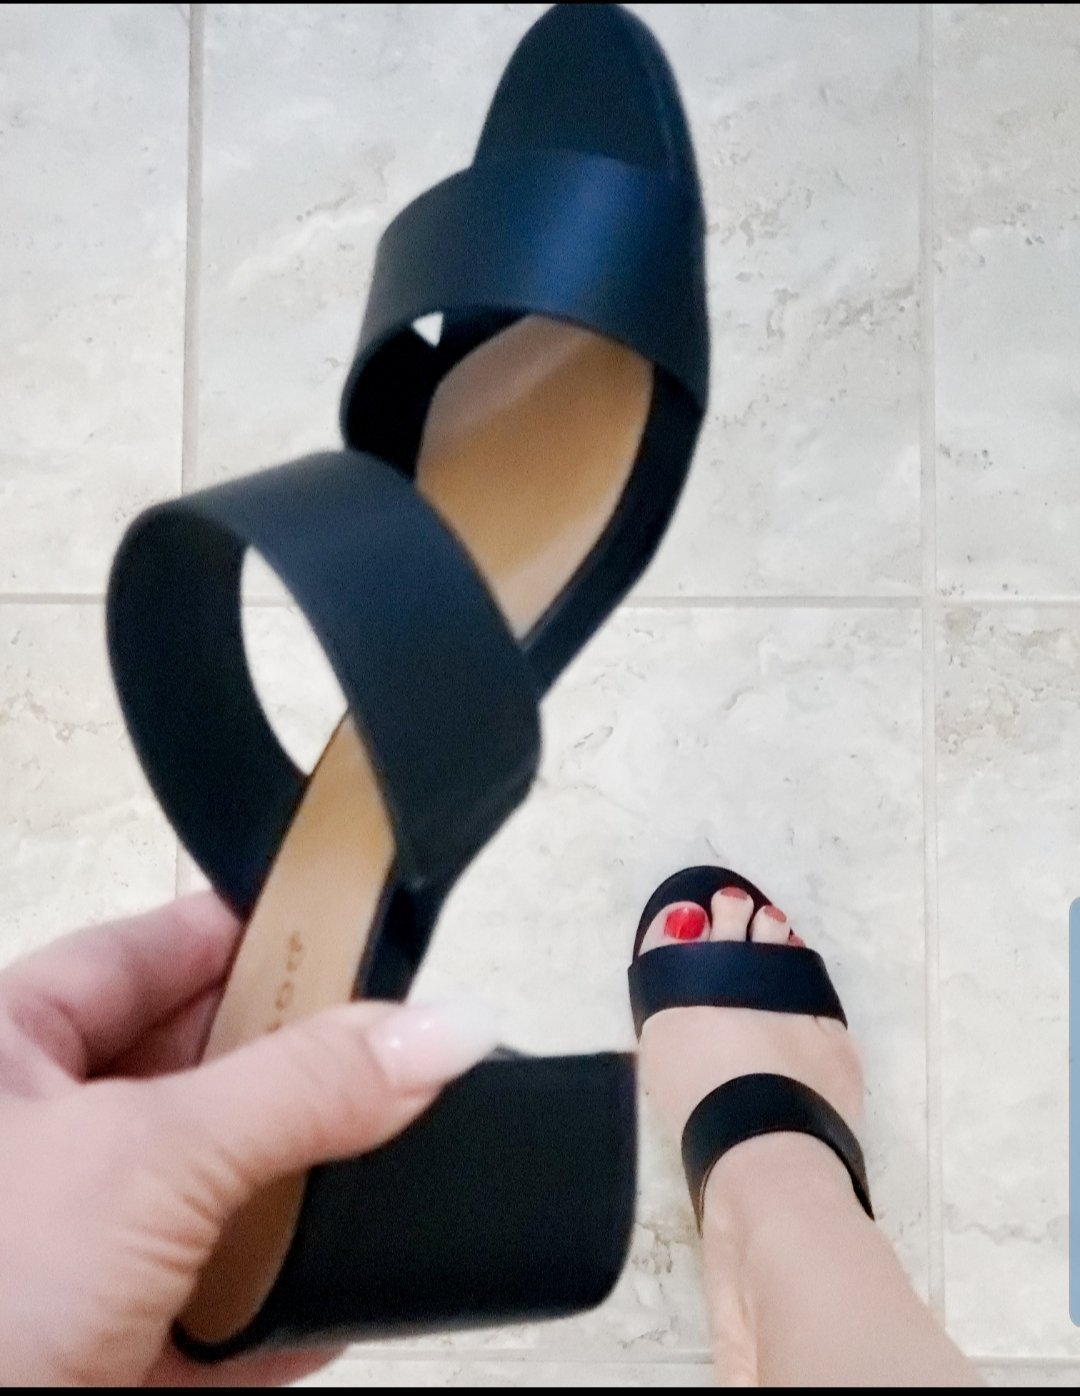 The Quynh Double Strap Shoe